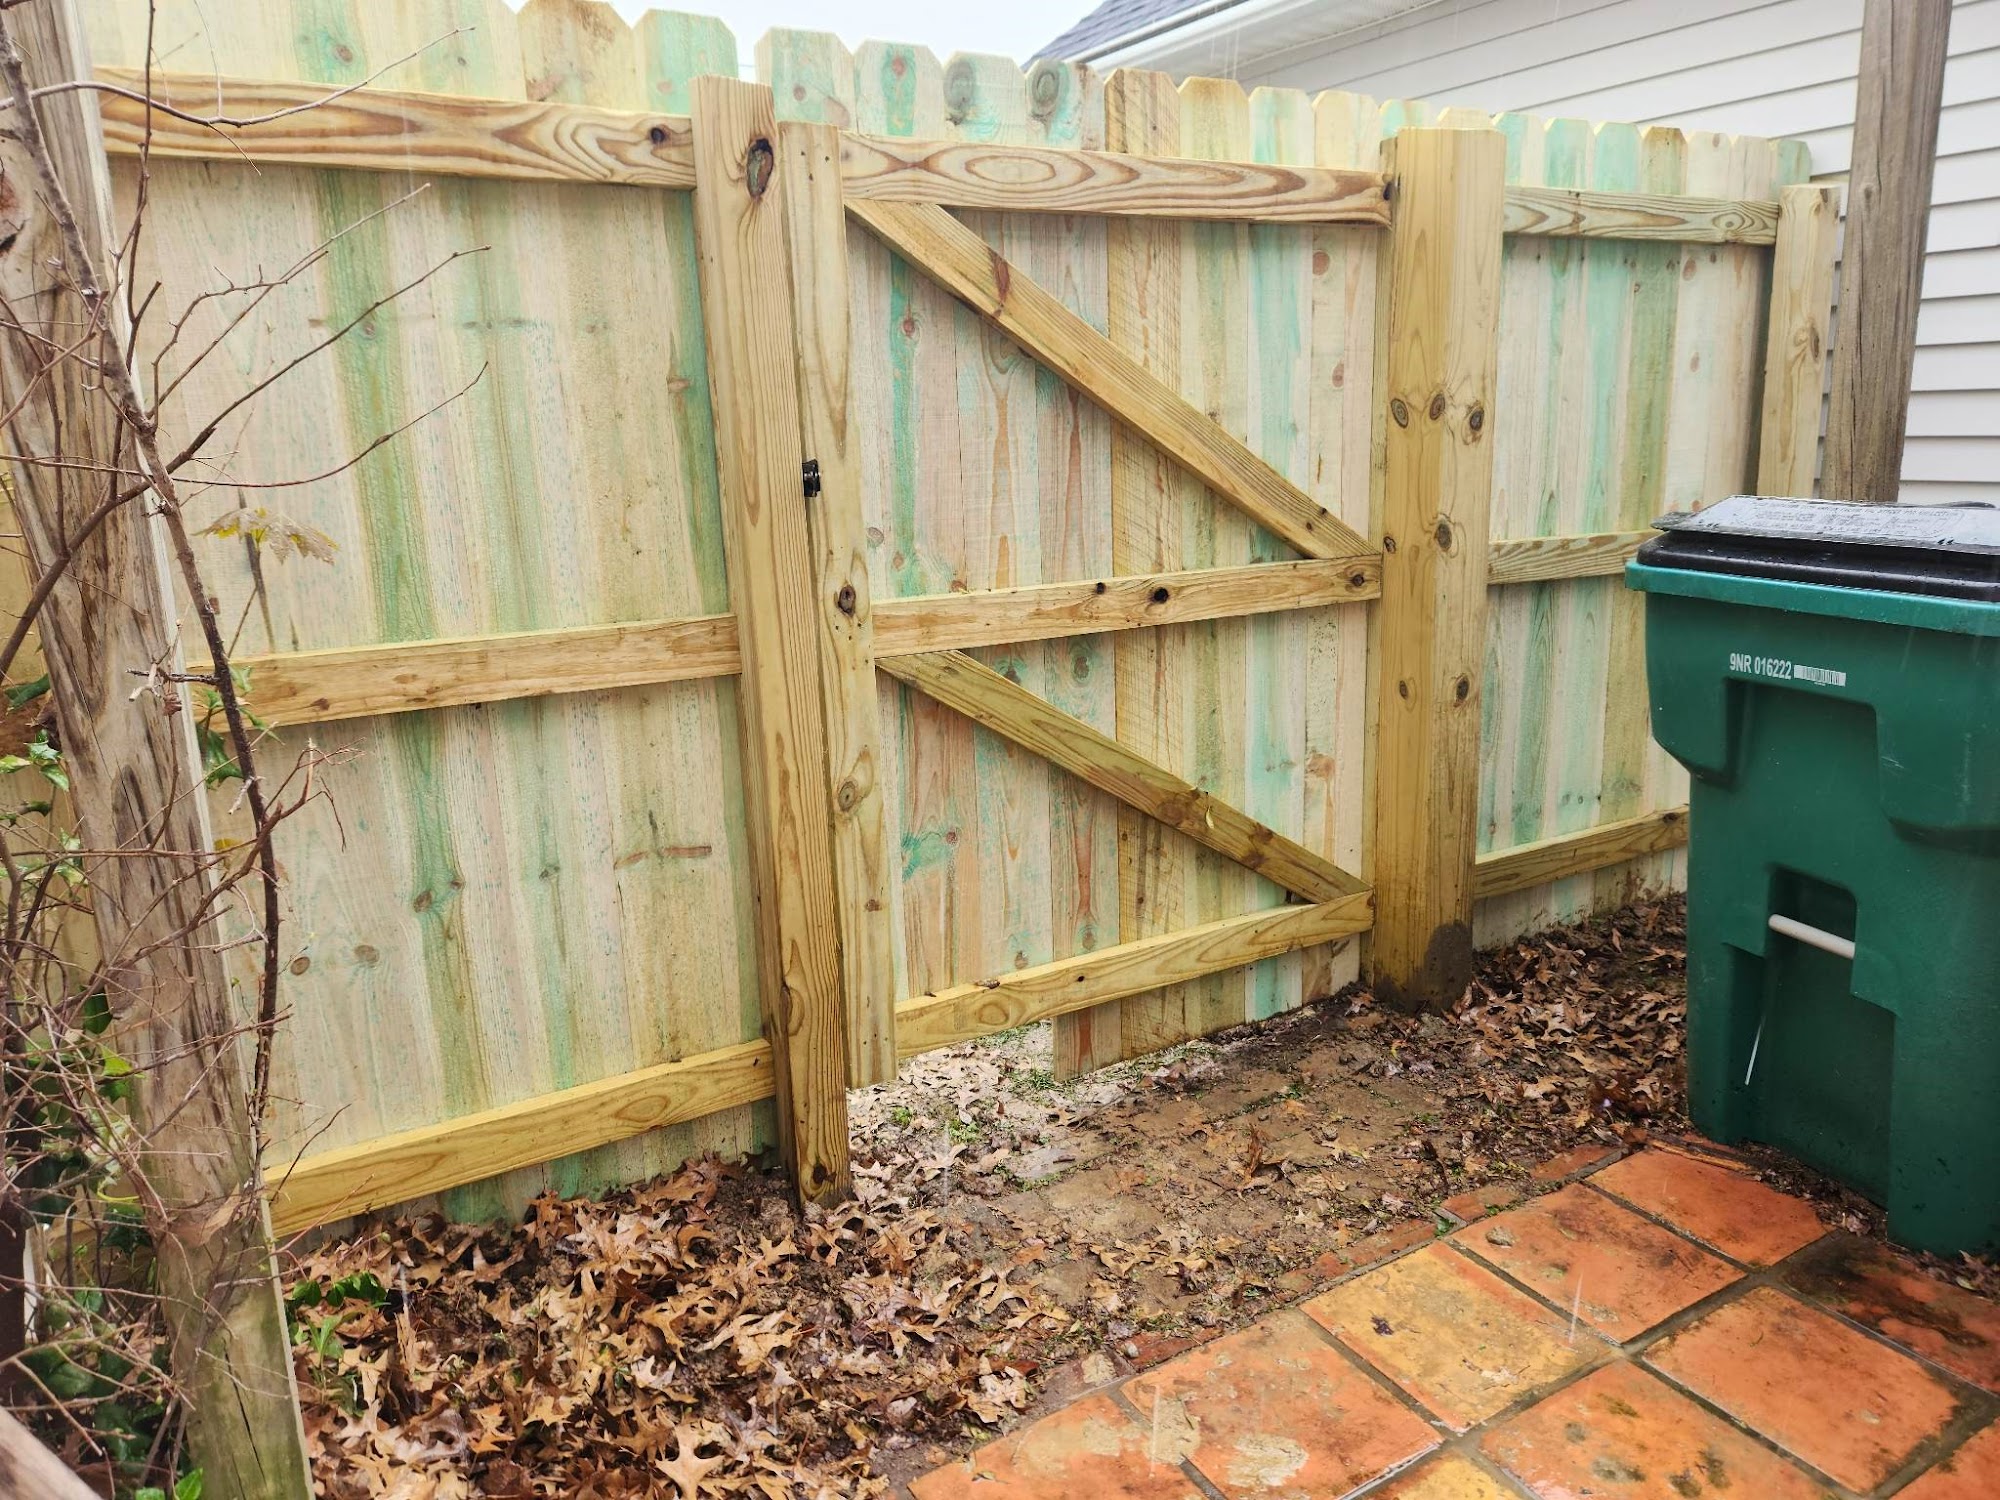 FENCEWORKS OF MIDDLE TENNESSEE